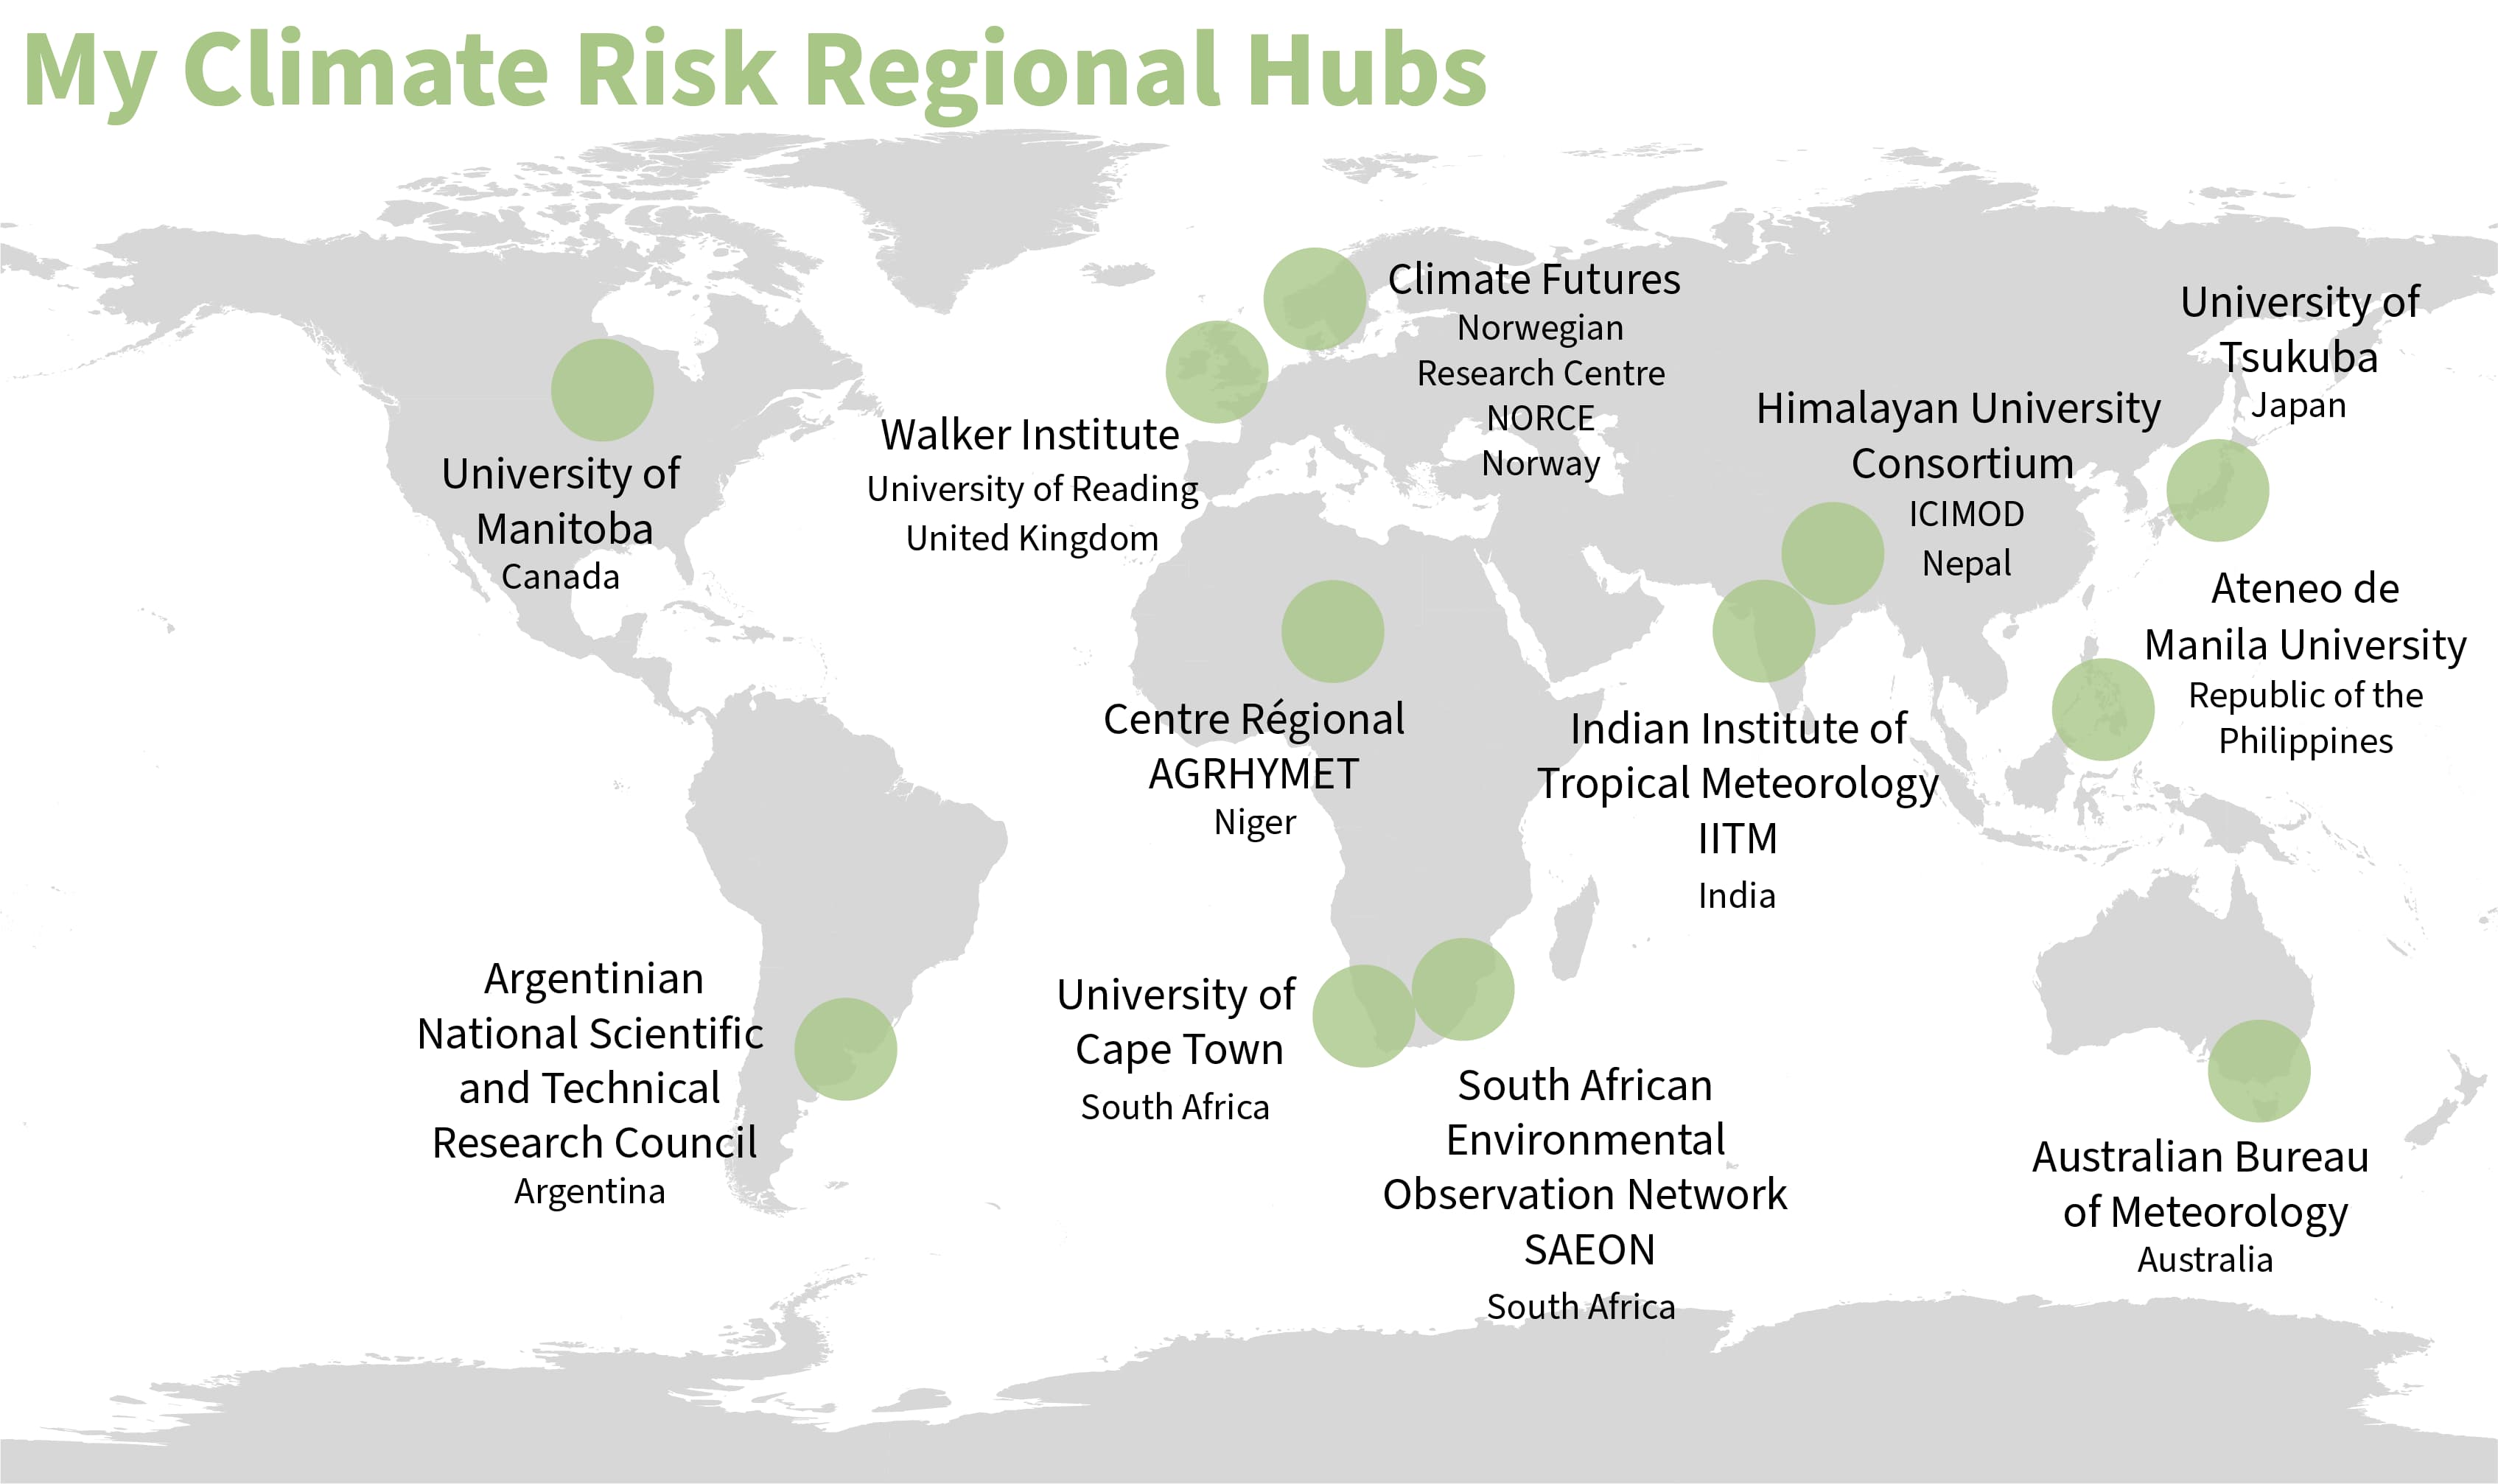 My Climate Risks Hubs